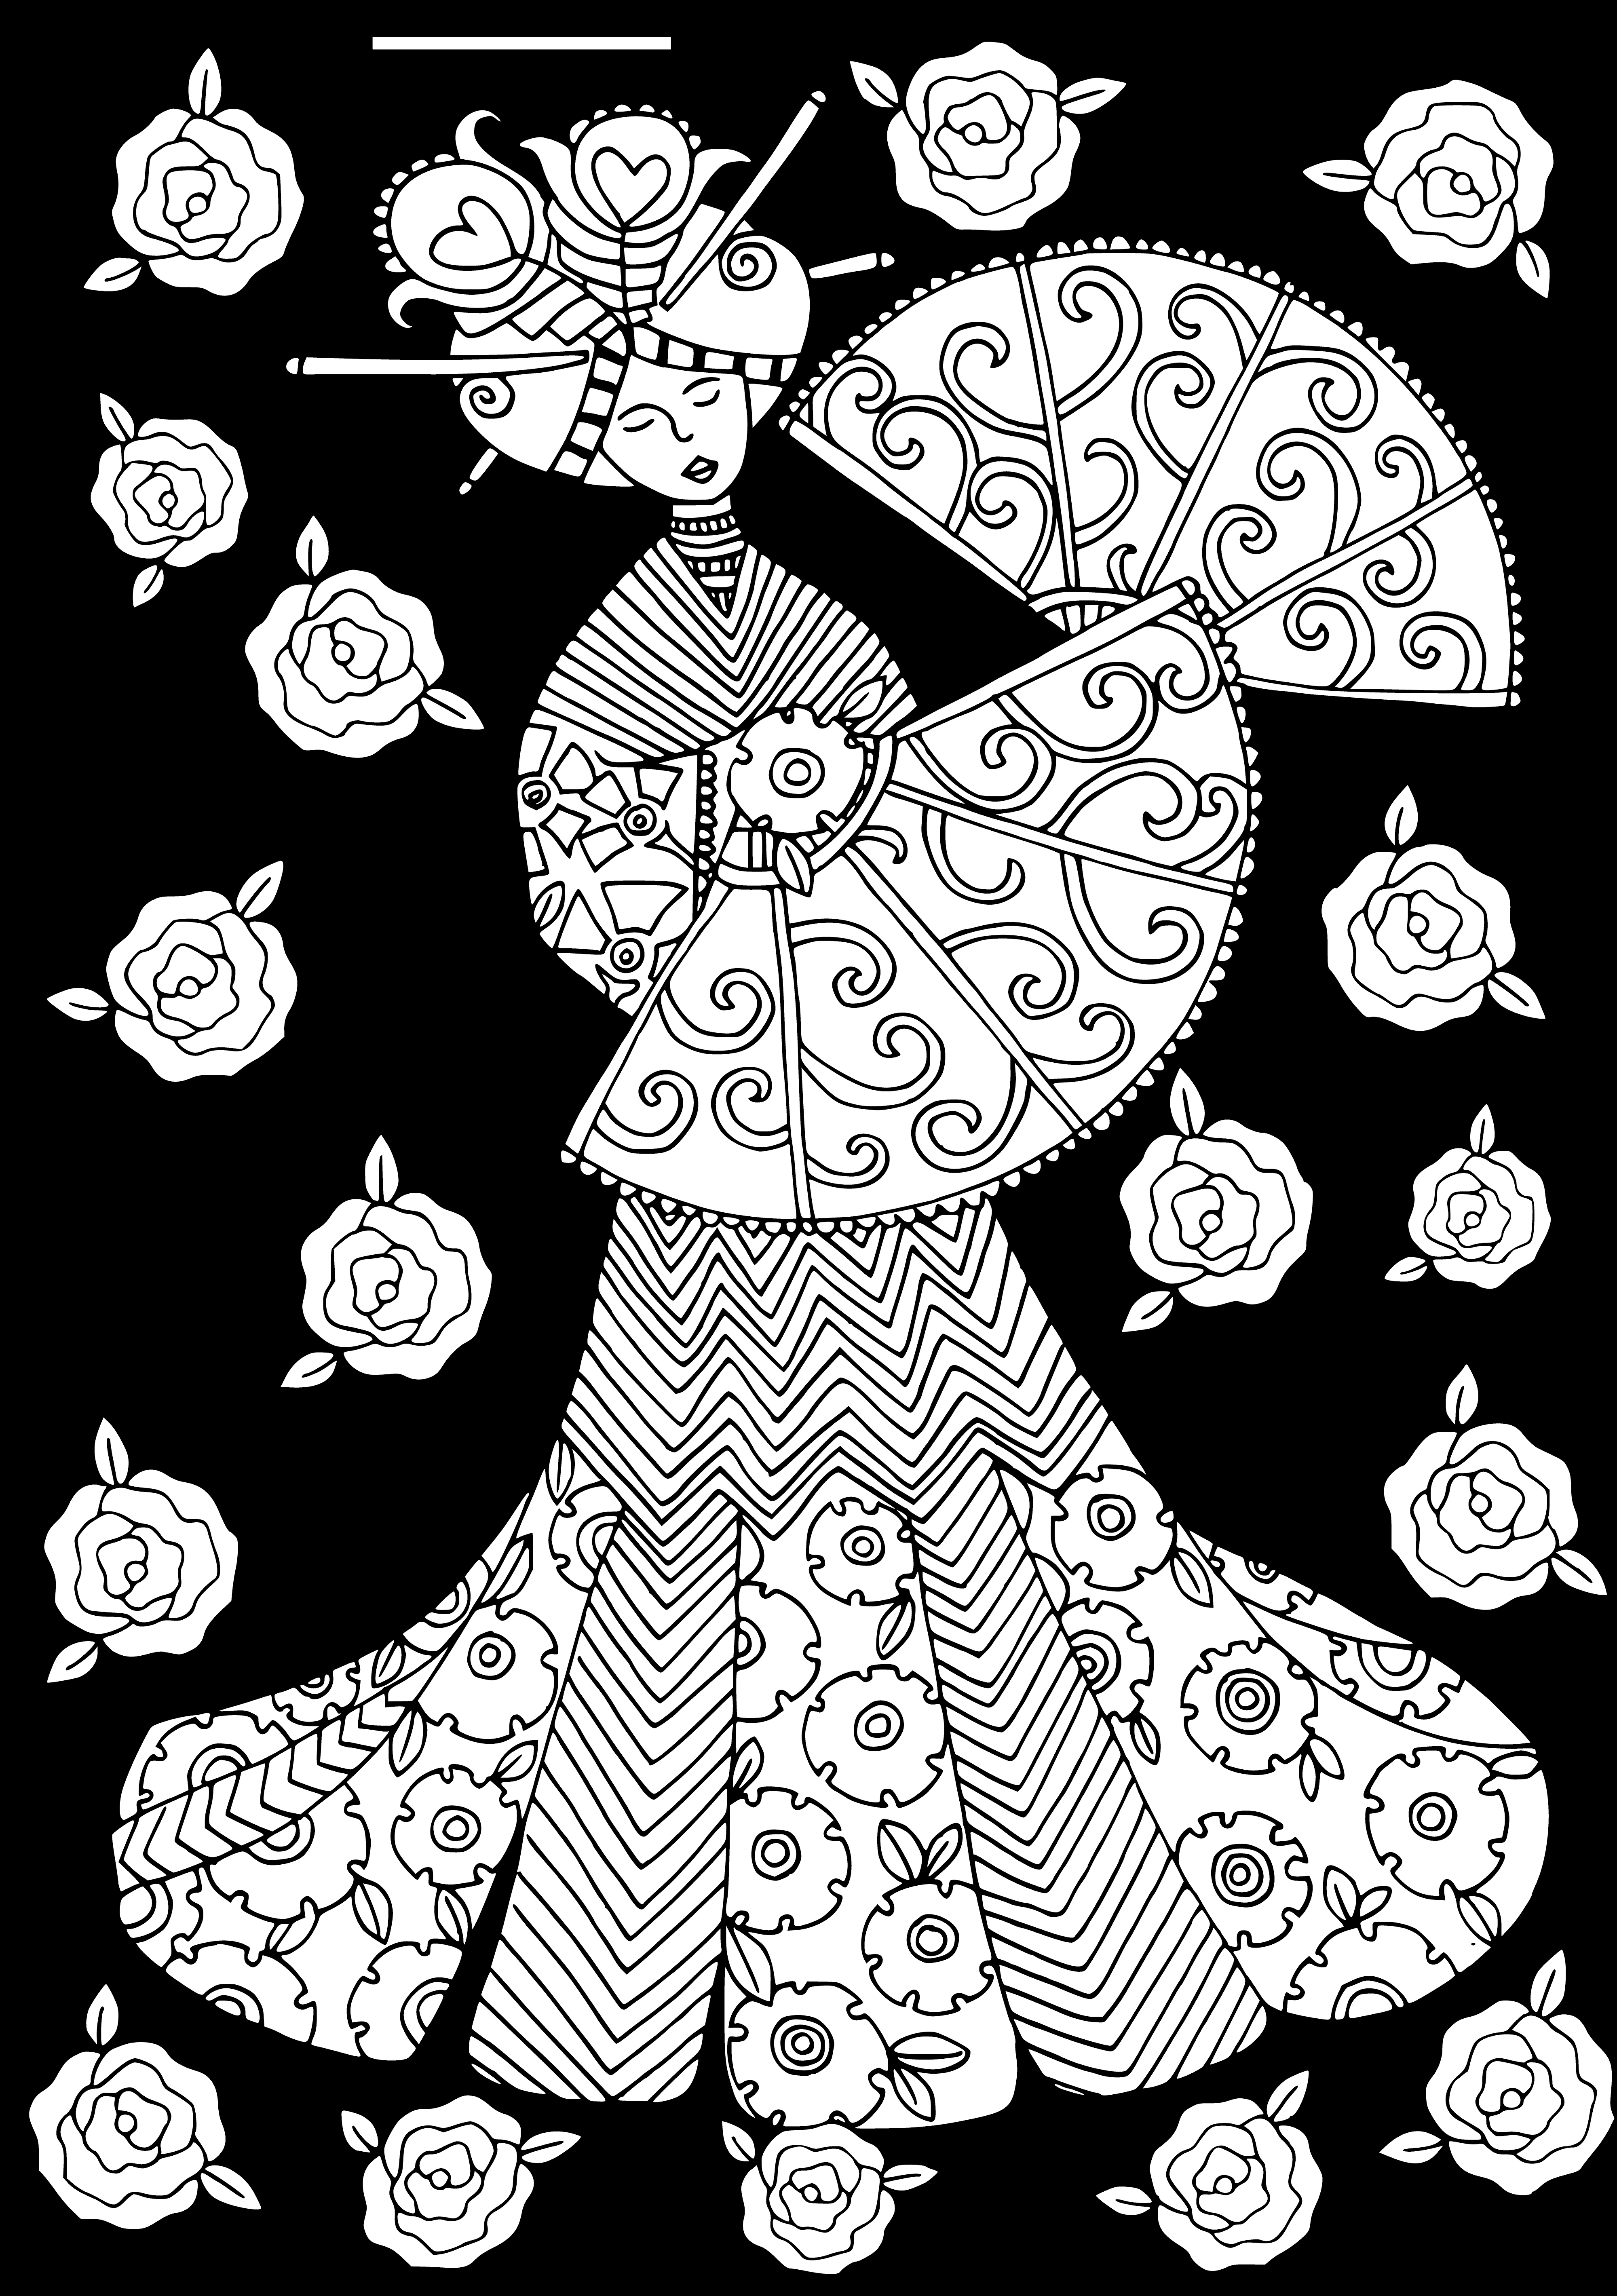 coloring page: Girl joyfully dances with a fan, feeling carefree.